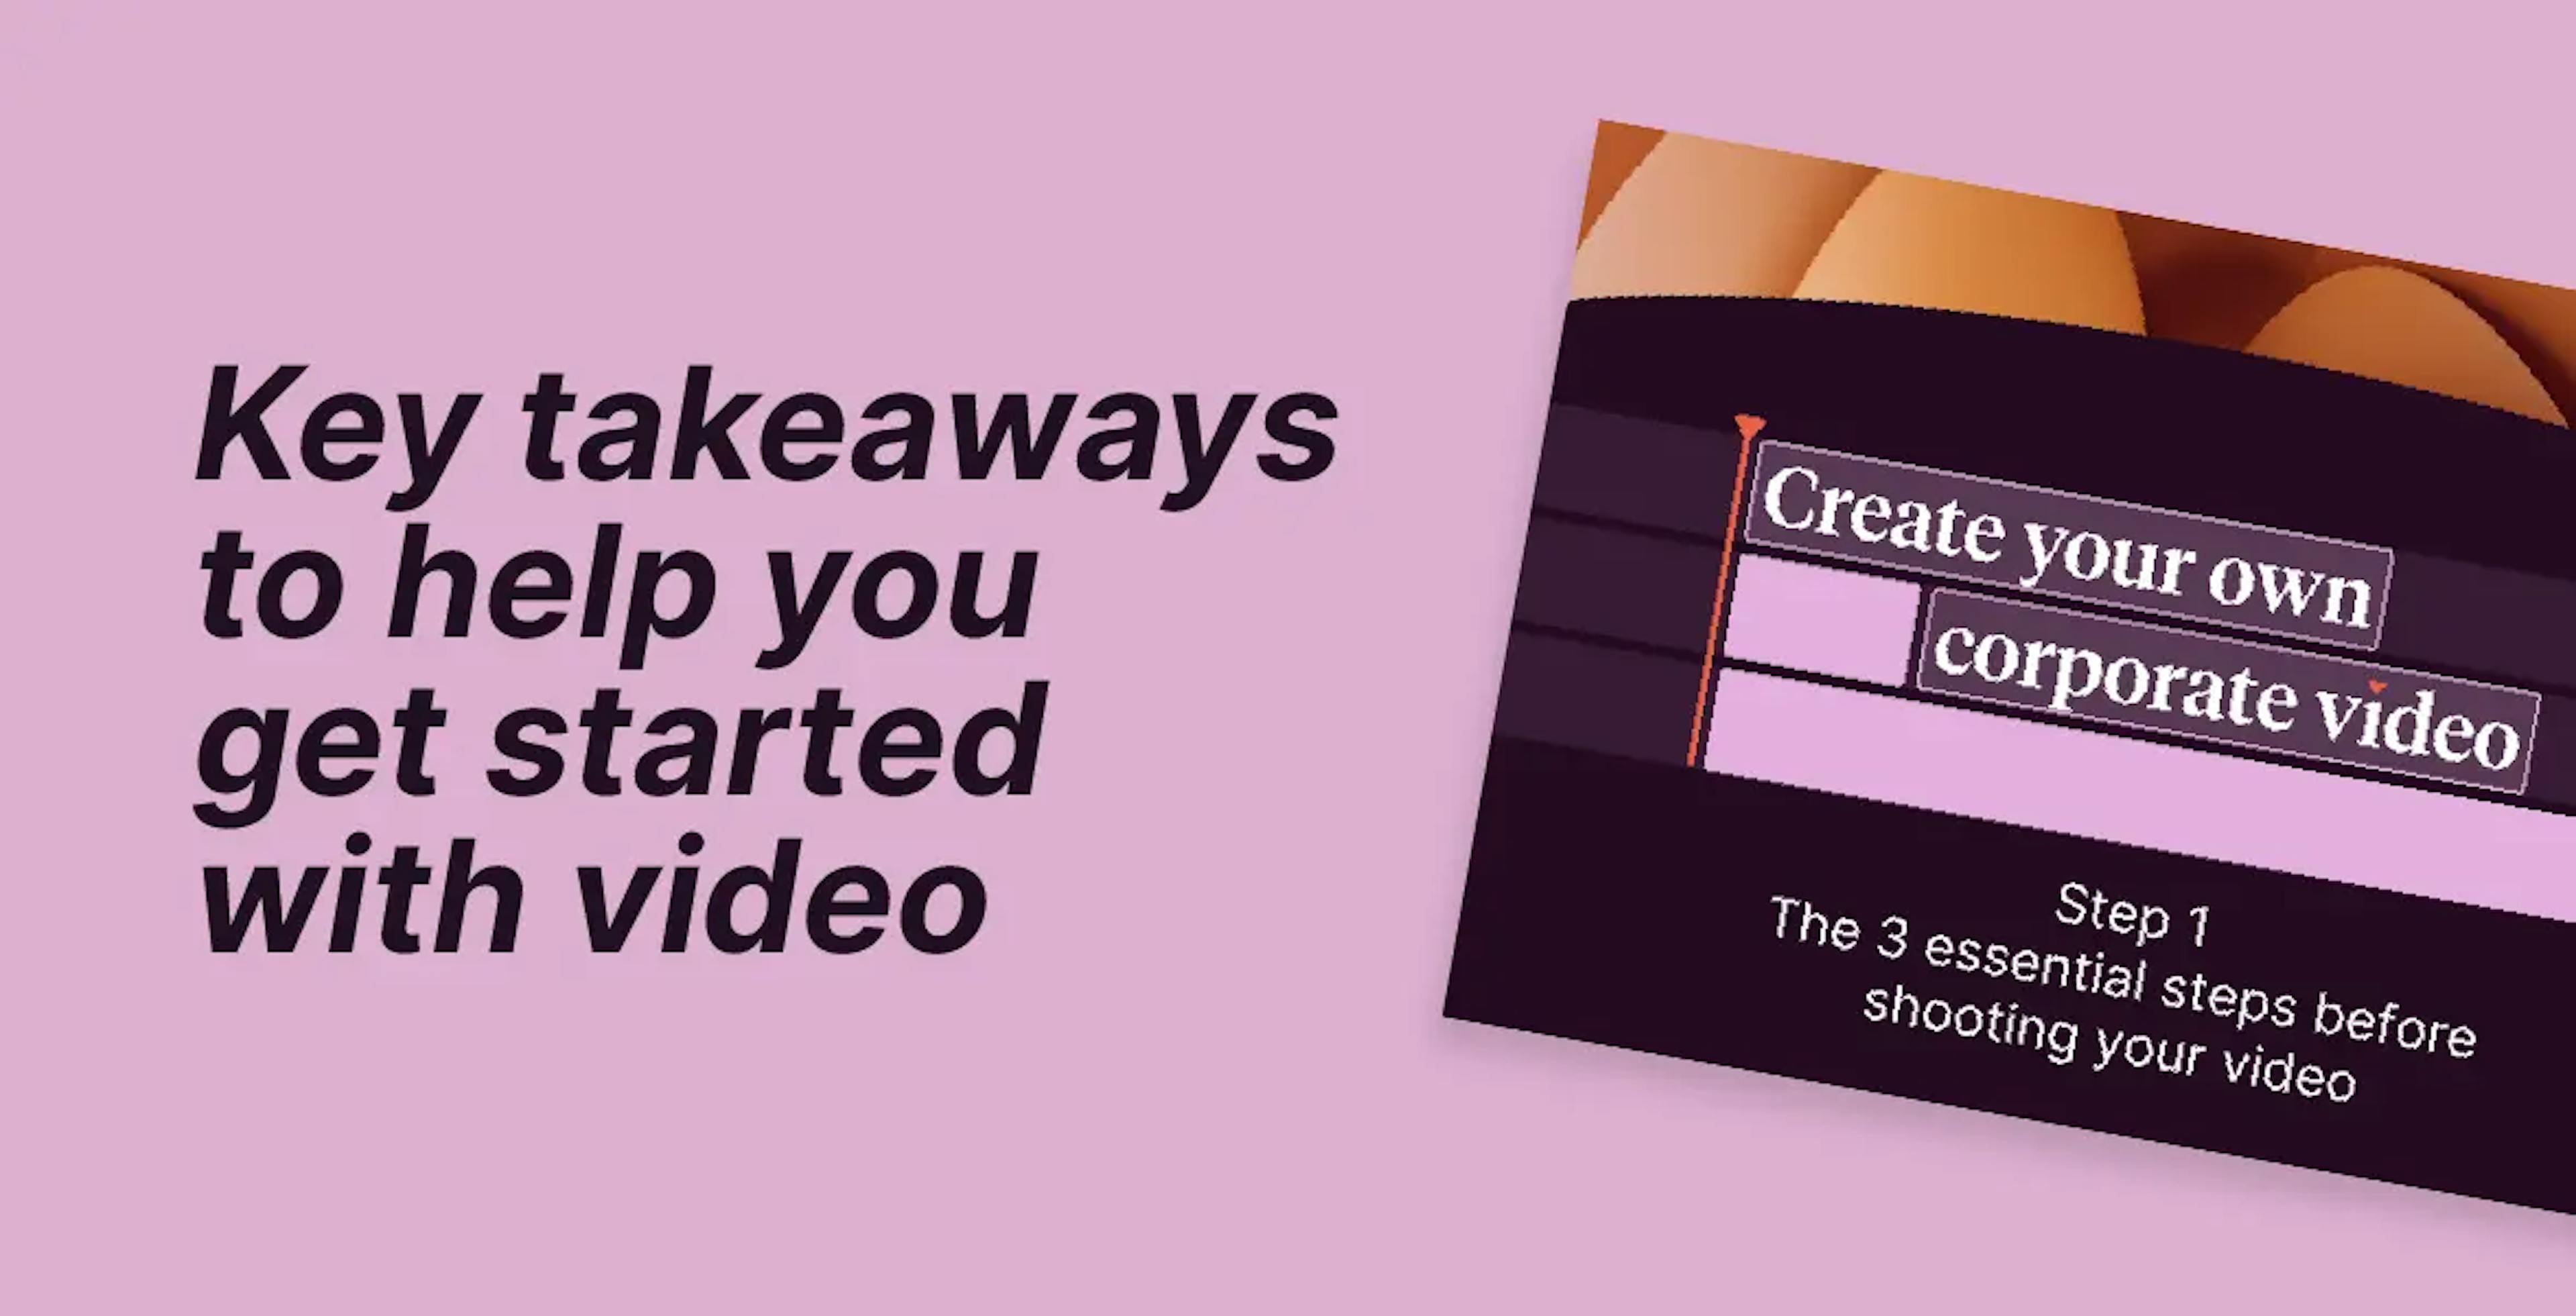 Whitebook step 1 to help you create your own corporate video